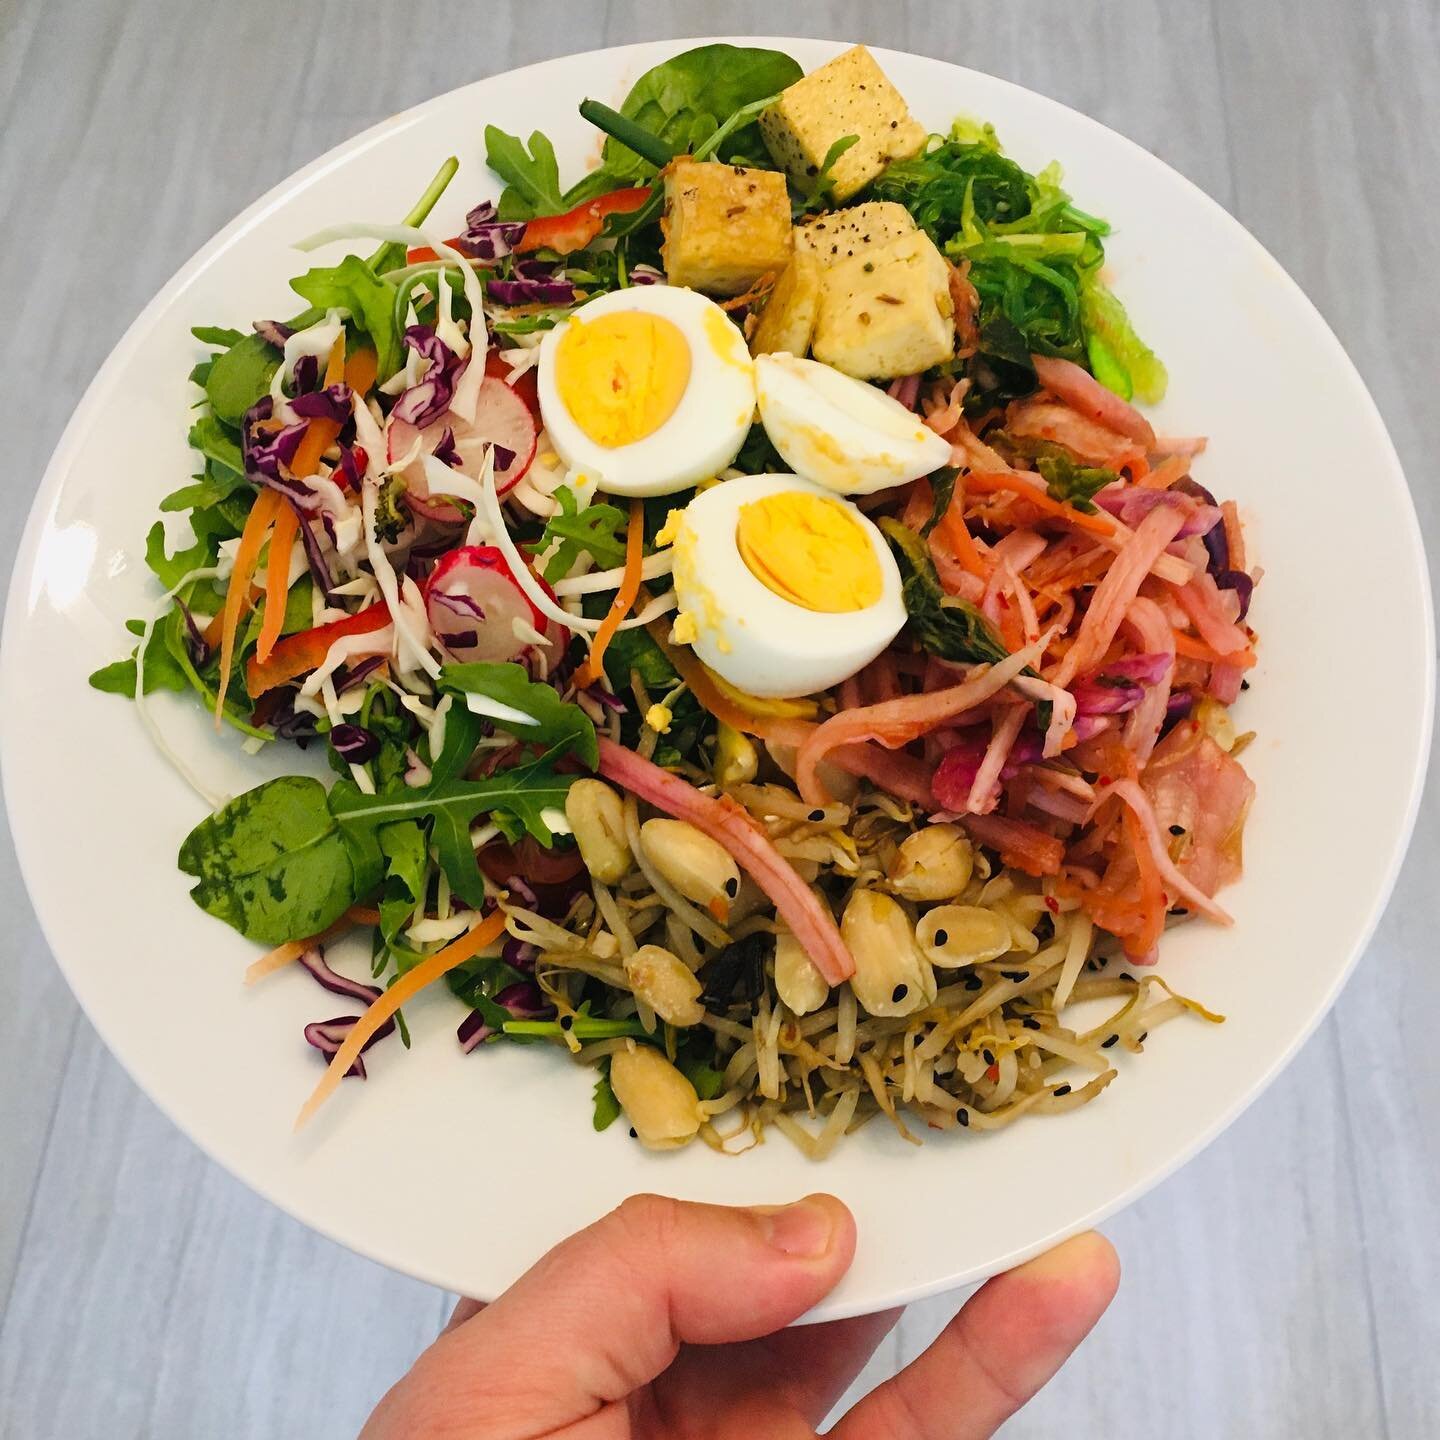 C-Hop Dinner Drops! Calorie controlled dishes, tailored nutrition plans and meal planning and advice. Tasty food to your door! #crickethopfood #homecooking #healthyfoods #stayathome #nutritioncoach #healthylifestyle